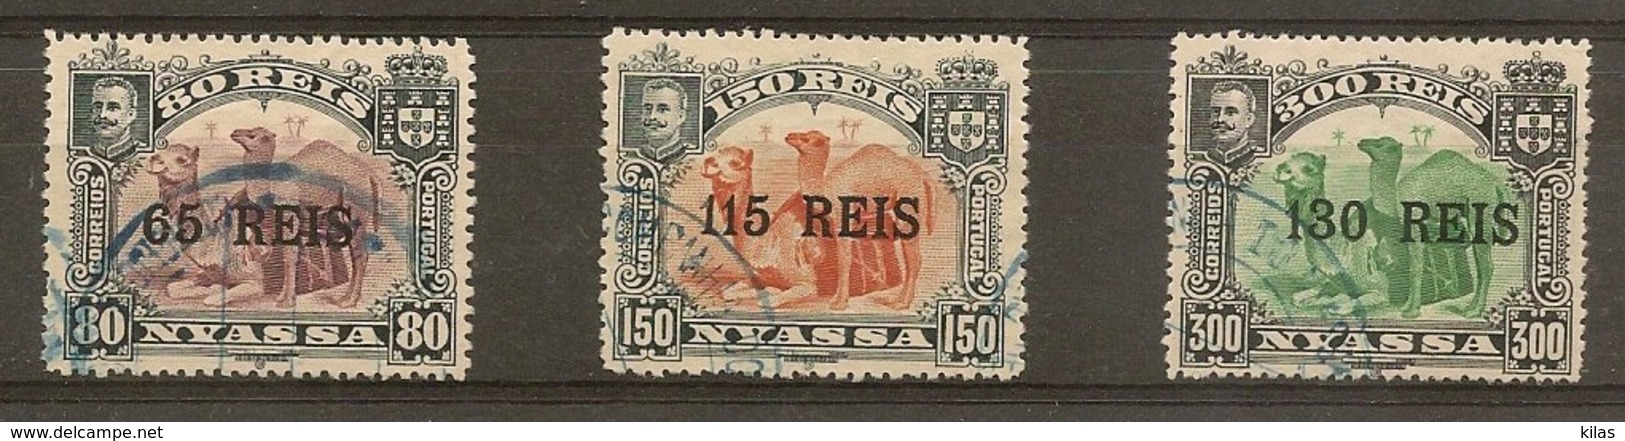 NYASSA 1903 King D. Carlos I, 1901 STAMPS WITH SURCHARGED - Congo Portuguesa